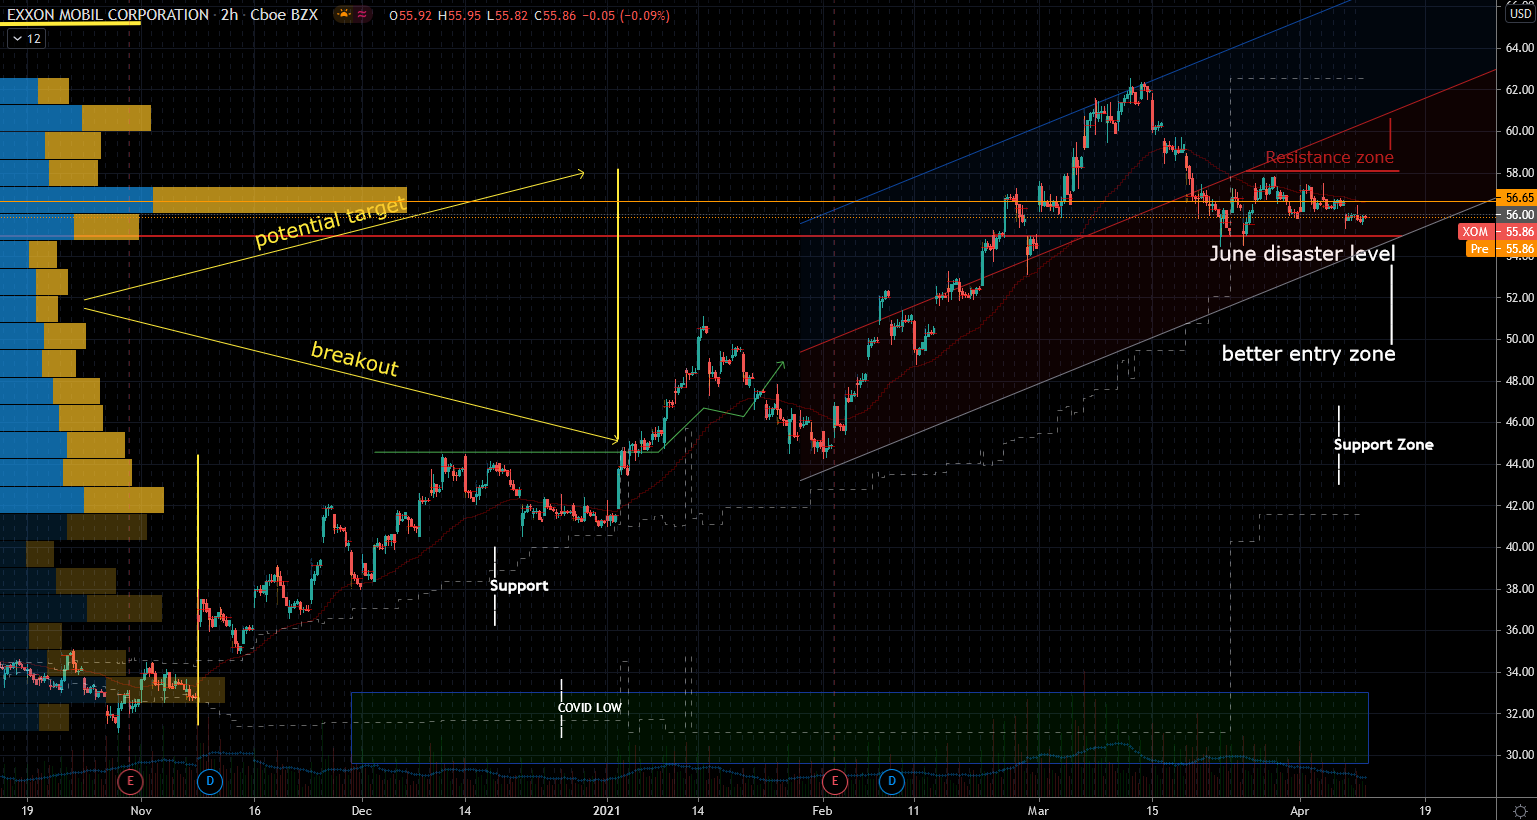 Exxon Mobil (XOM) Stock Chart Showing Better Entry Zone